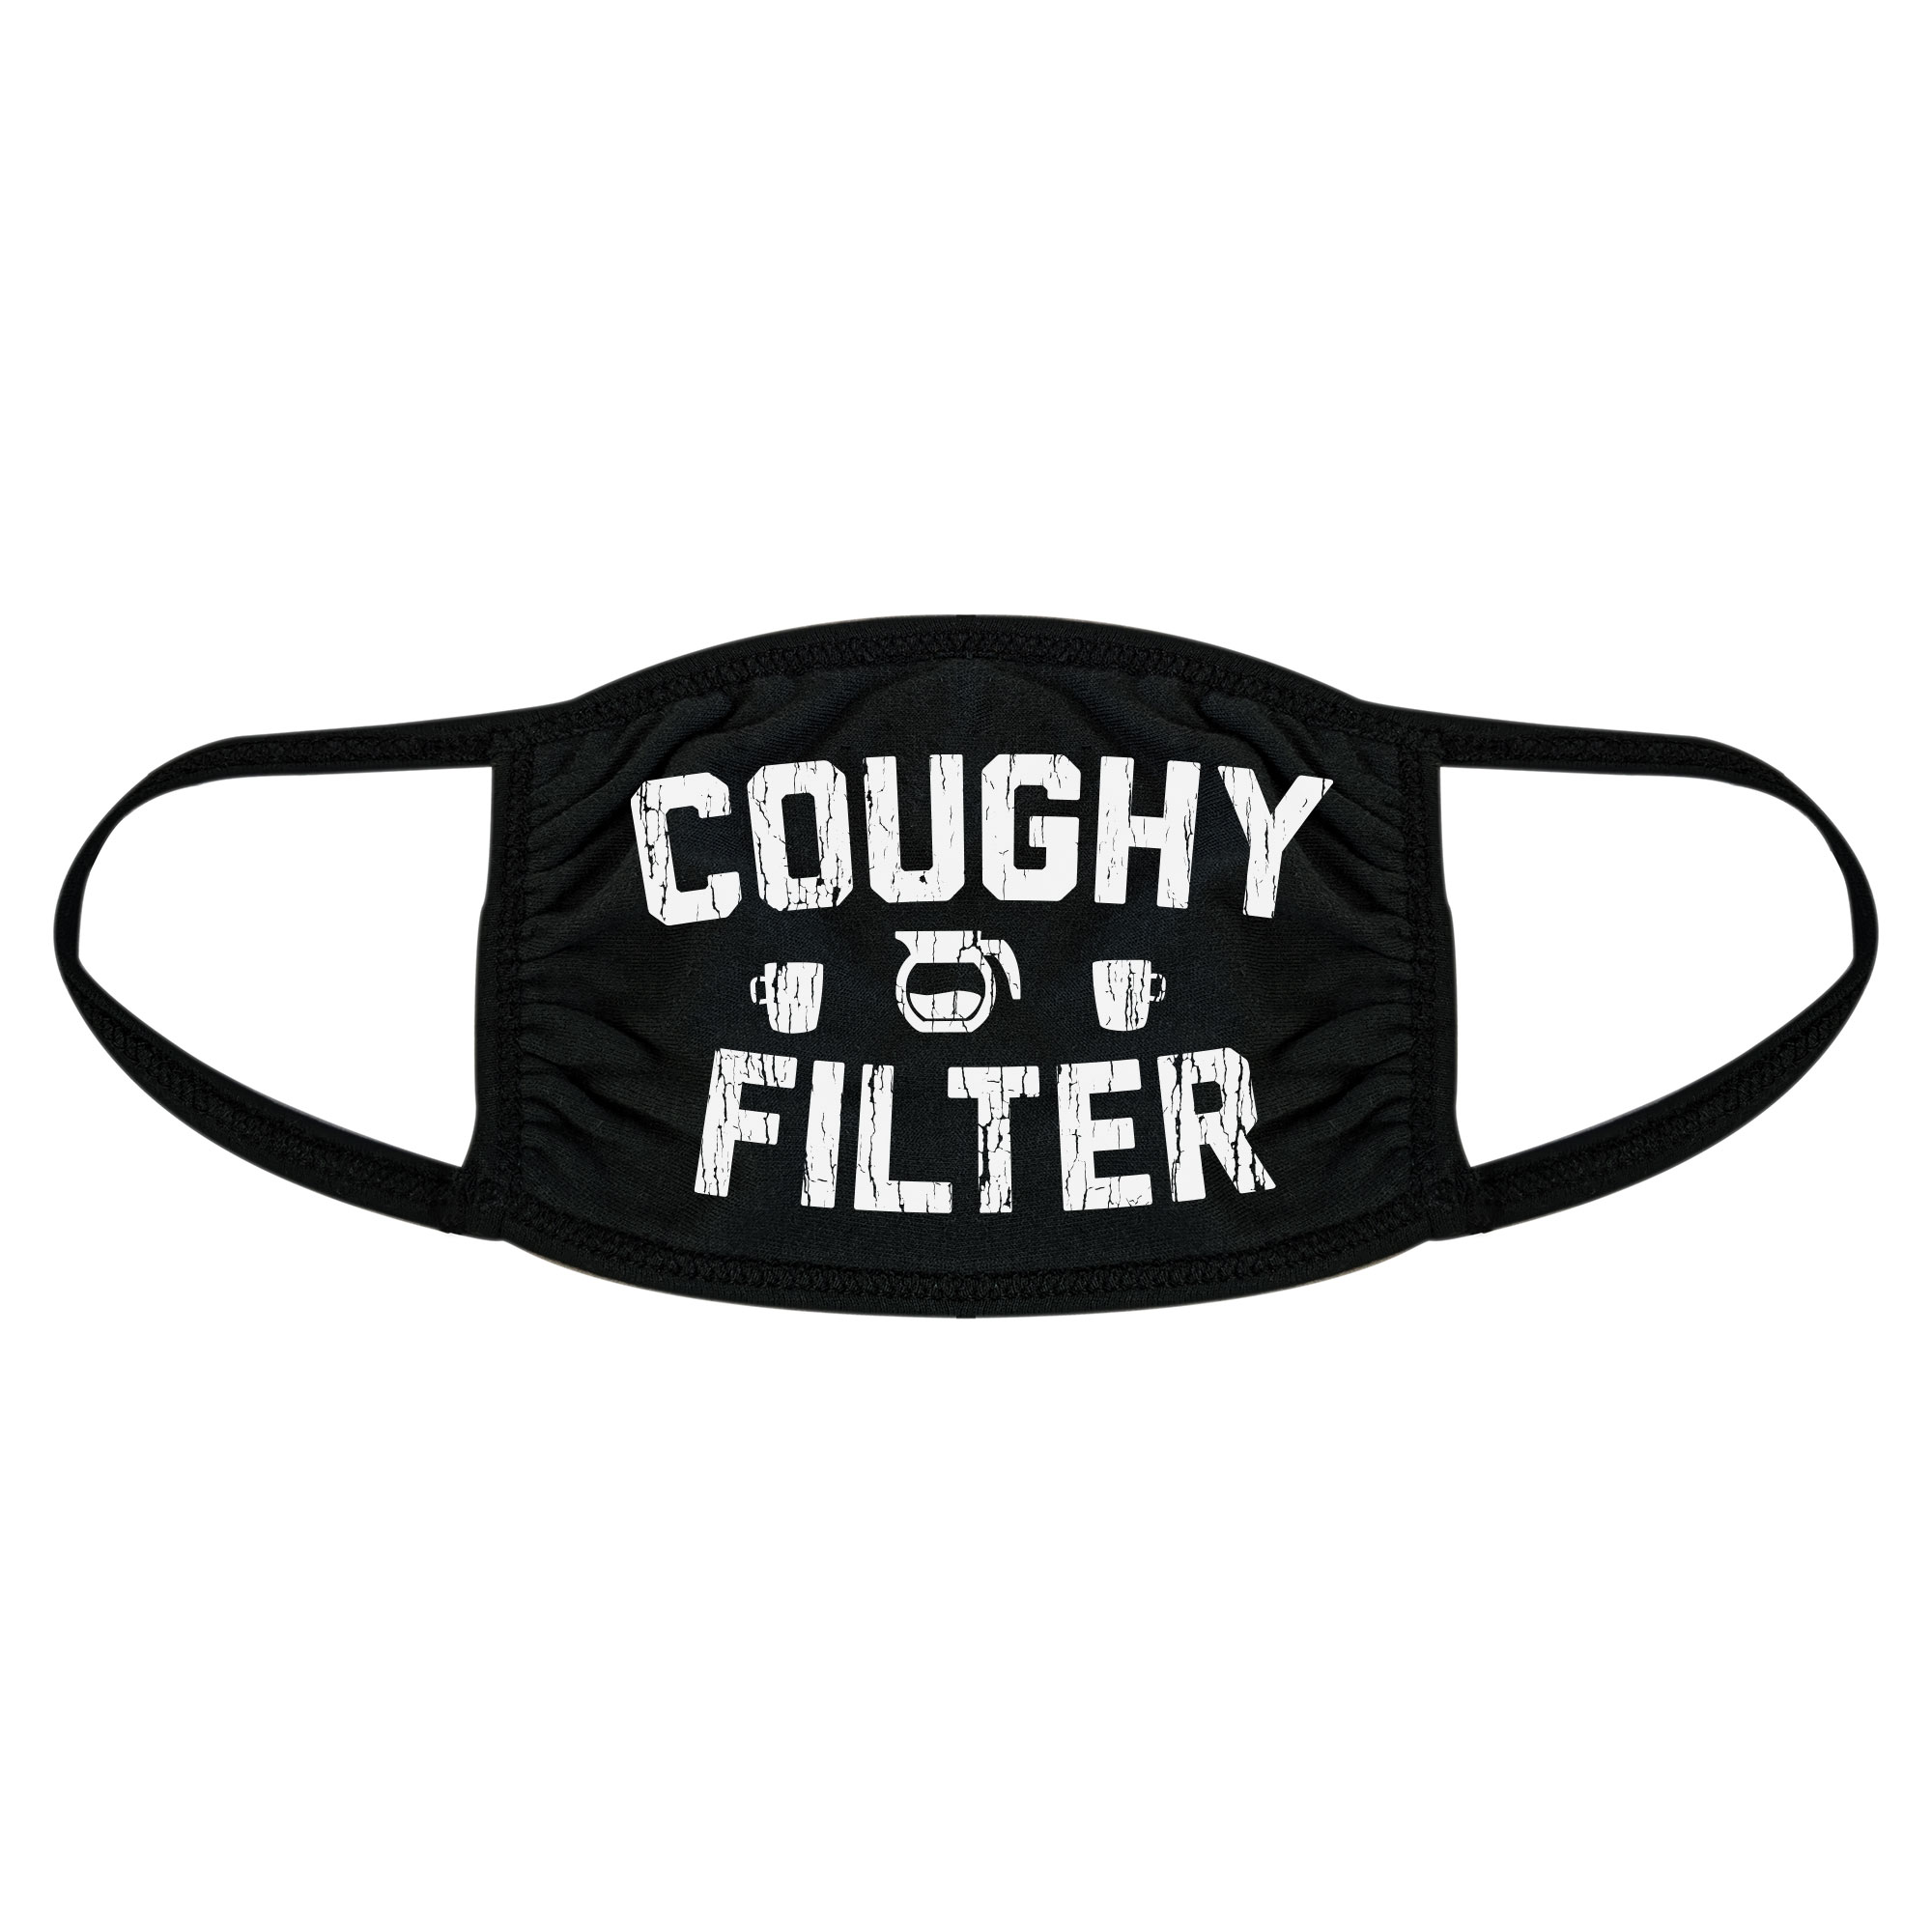 Coughy Filter Face Mask Funny Coffee Quarantine Graphic Novelty Nose And Mouth Covering - image 1 of 6